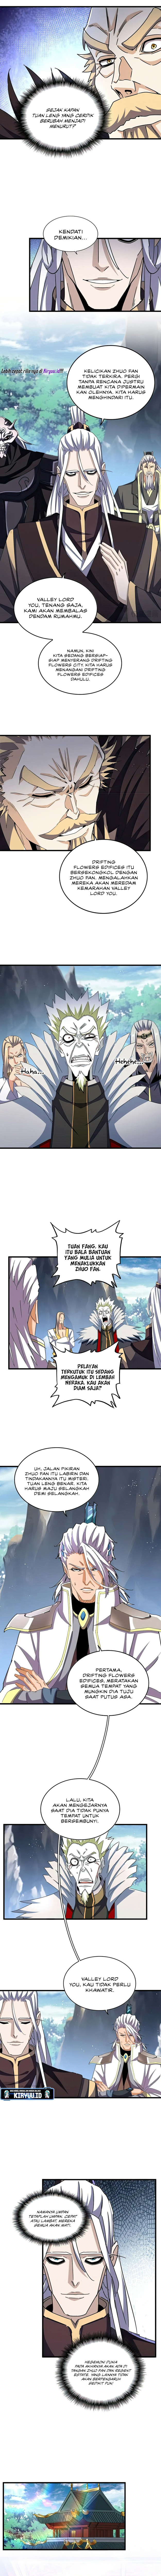 Magic Emperor Chapter 454 Image 3